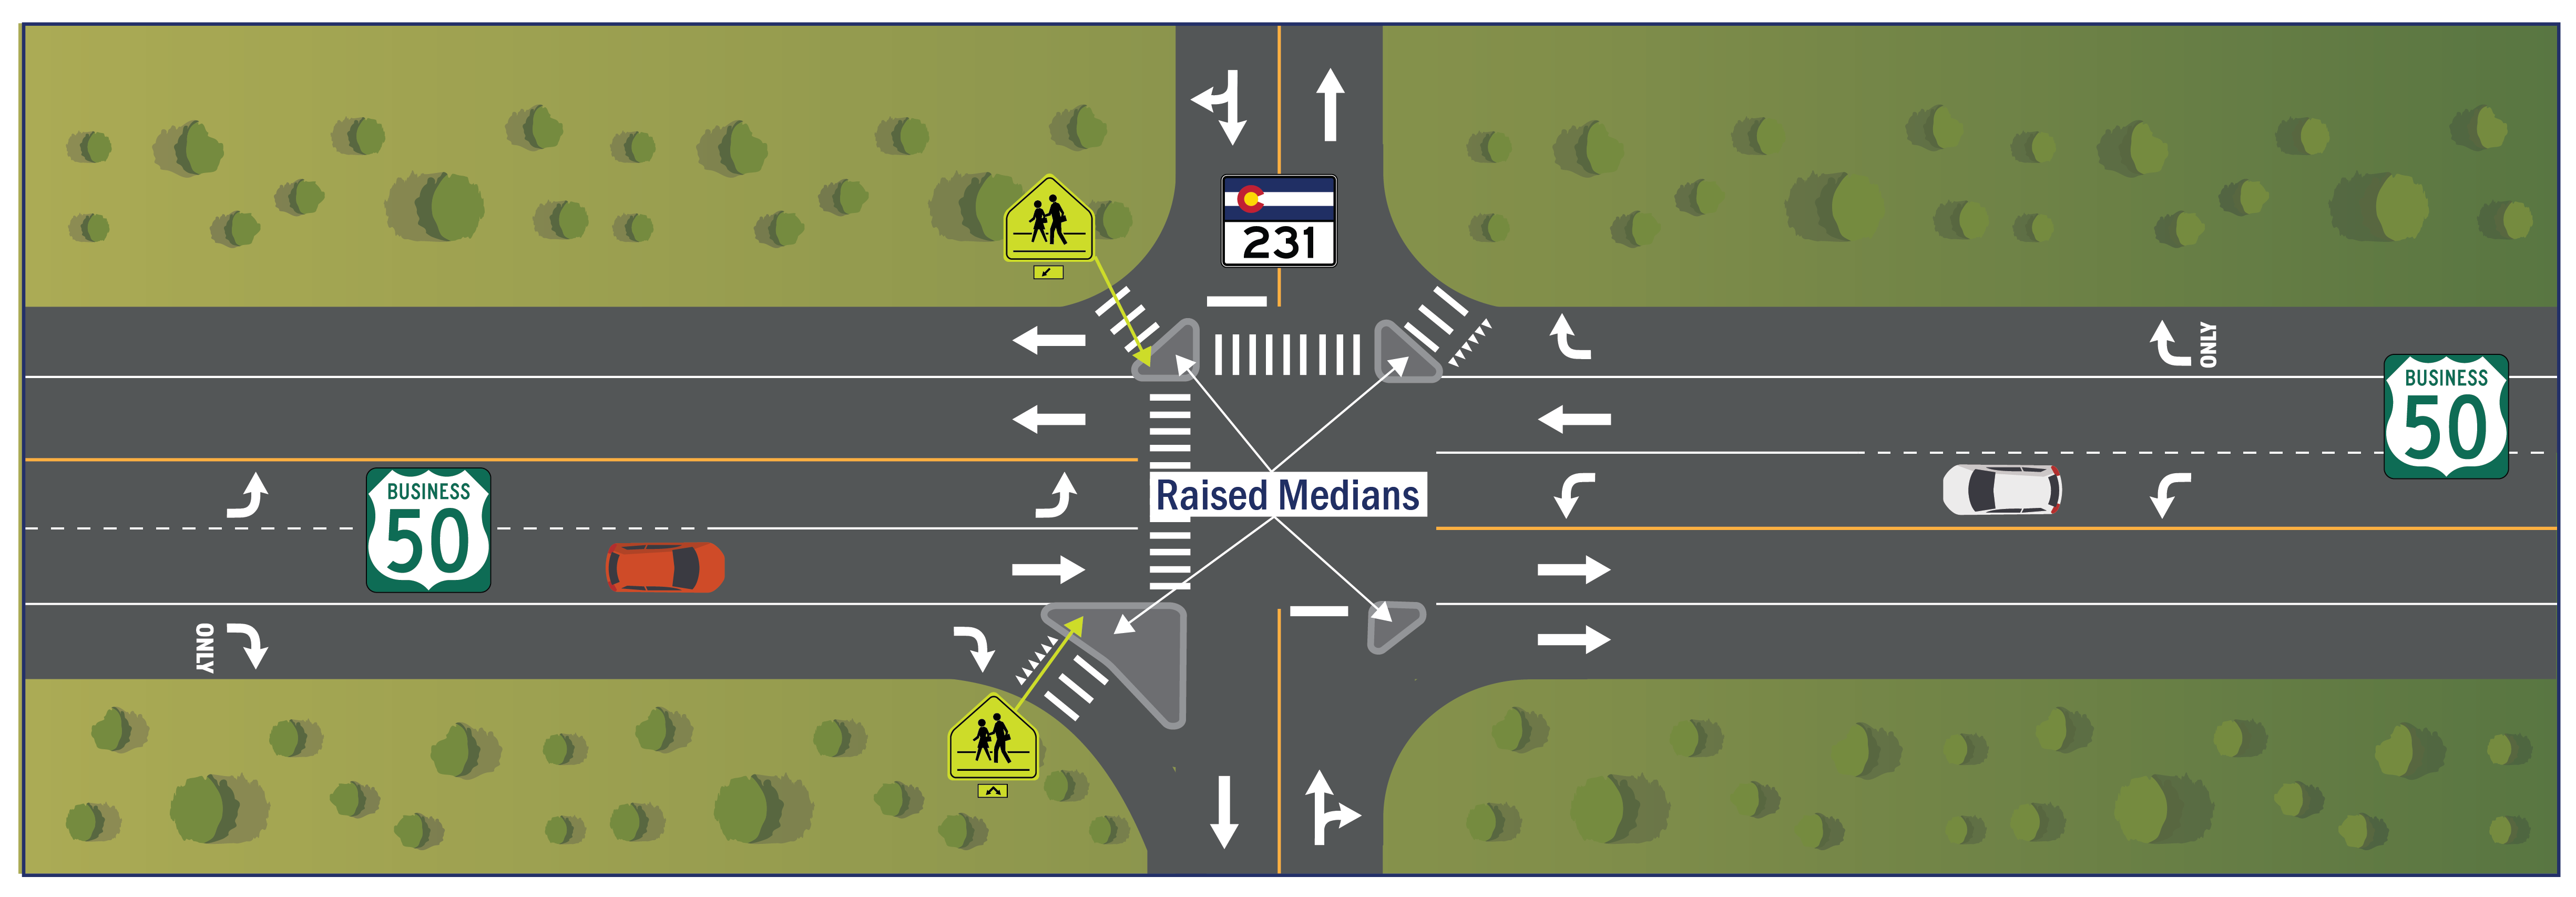 US 50 & CO 231 Business (36th Lane) Intersection Illustration 6.19.23-12.png detail image